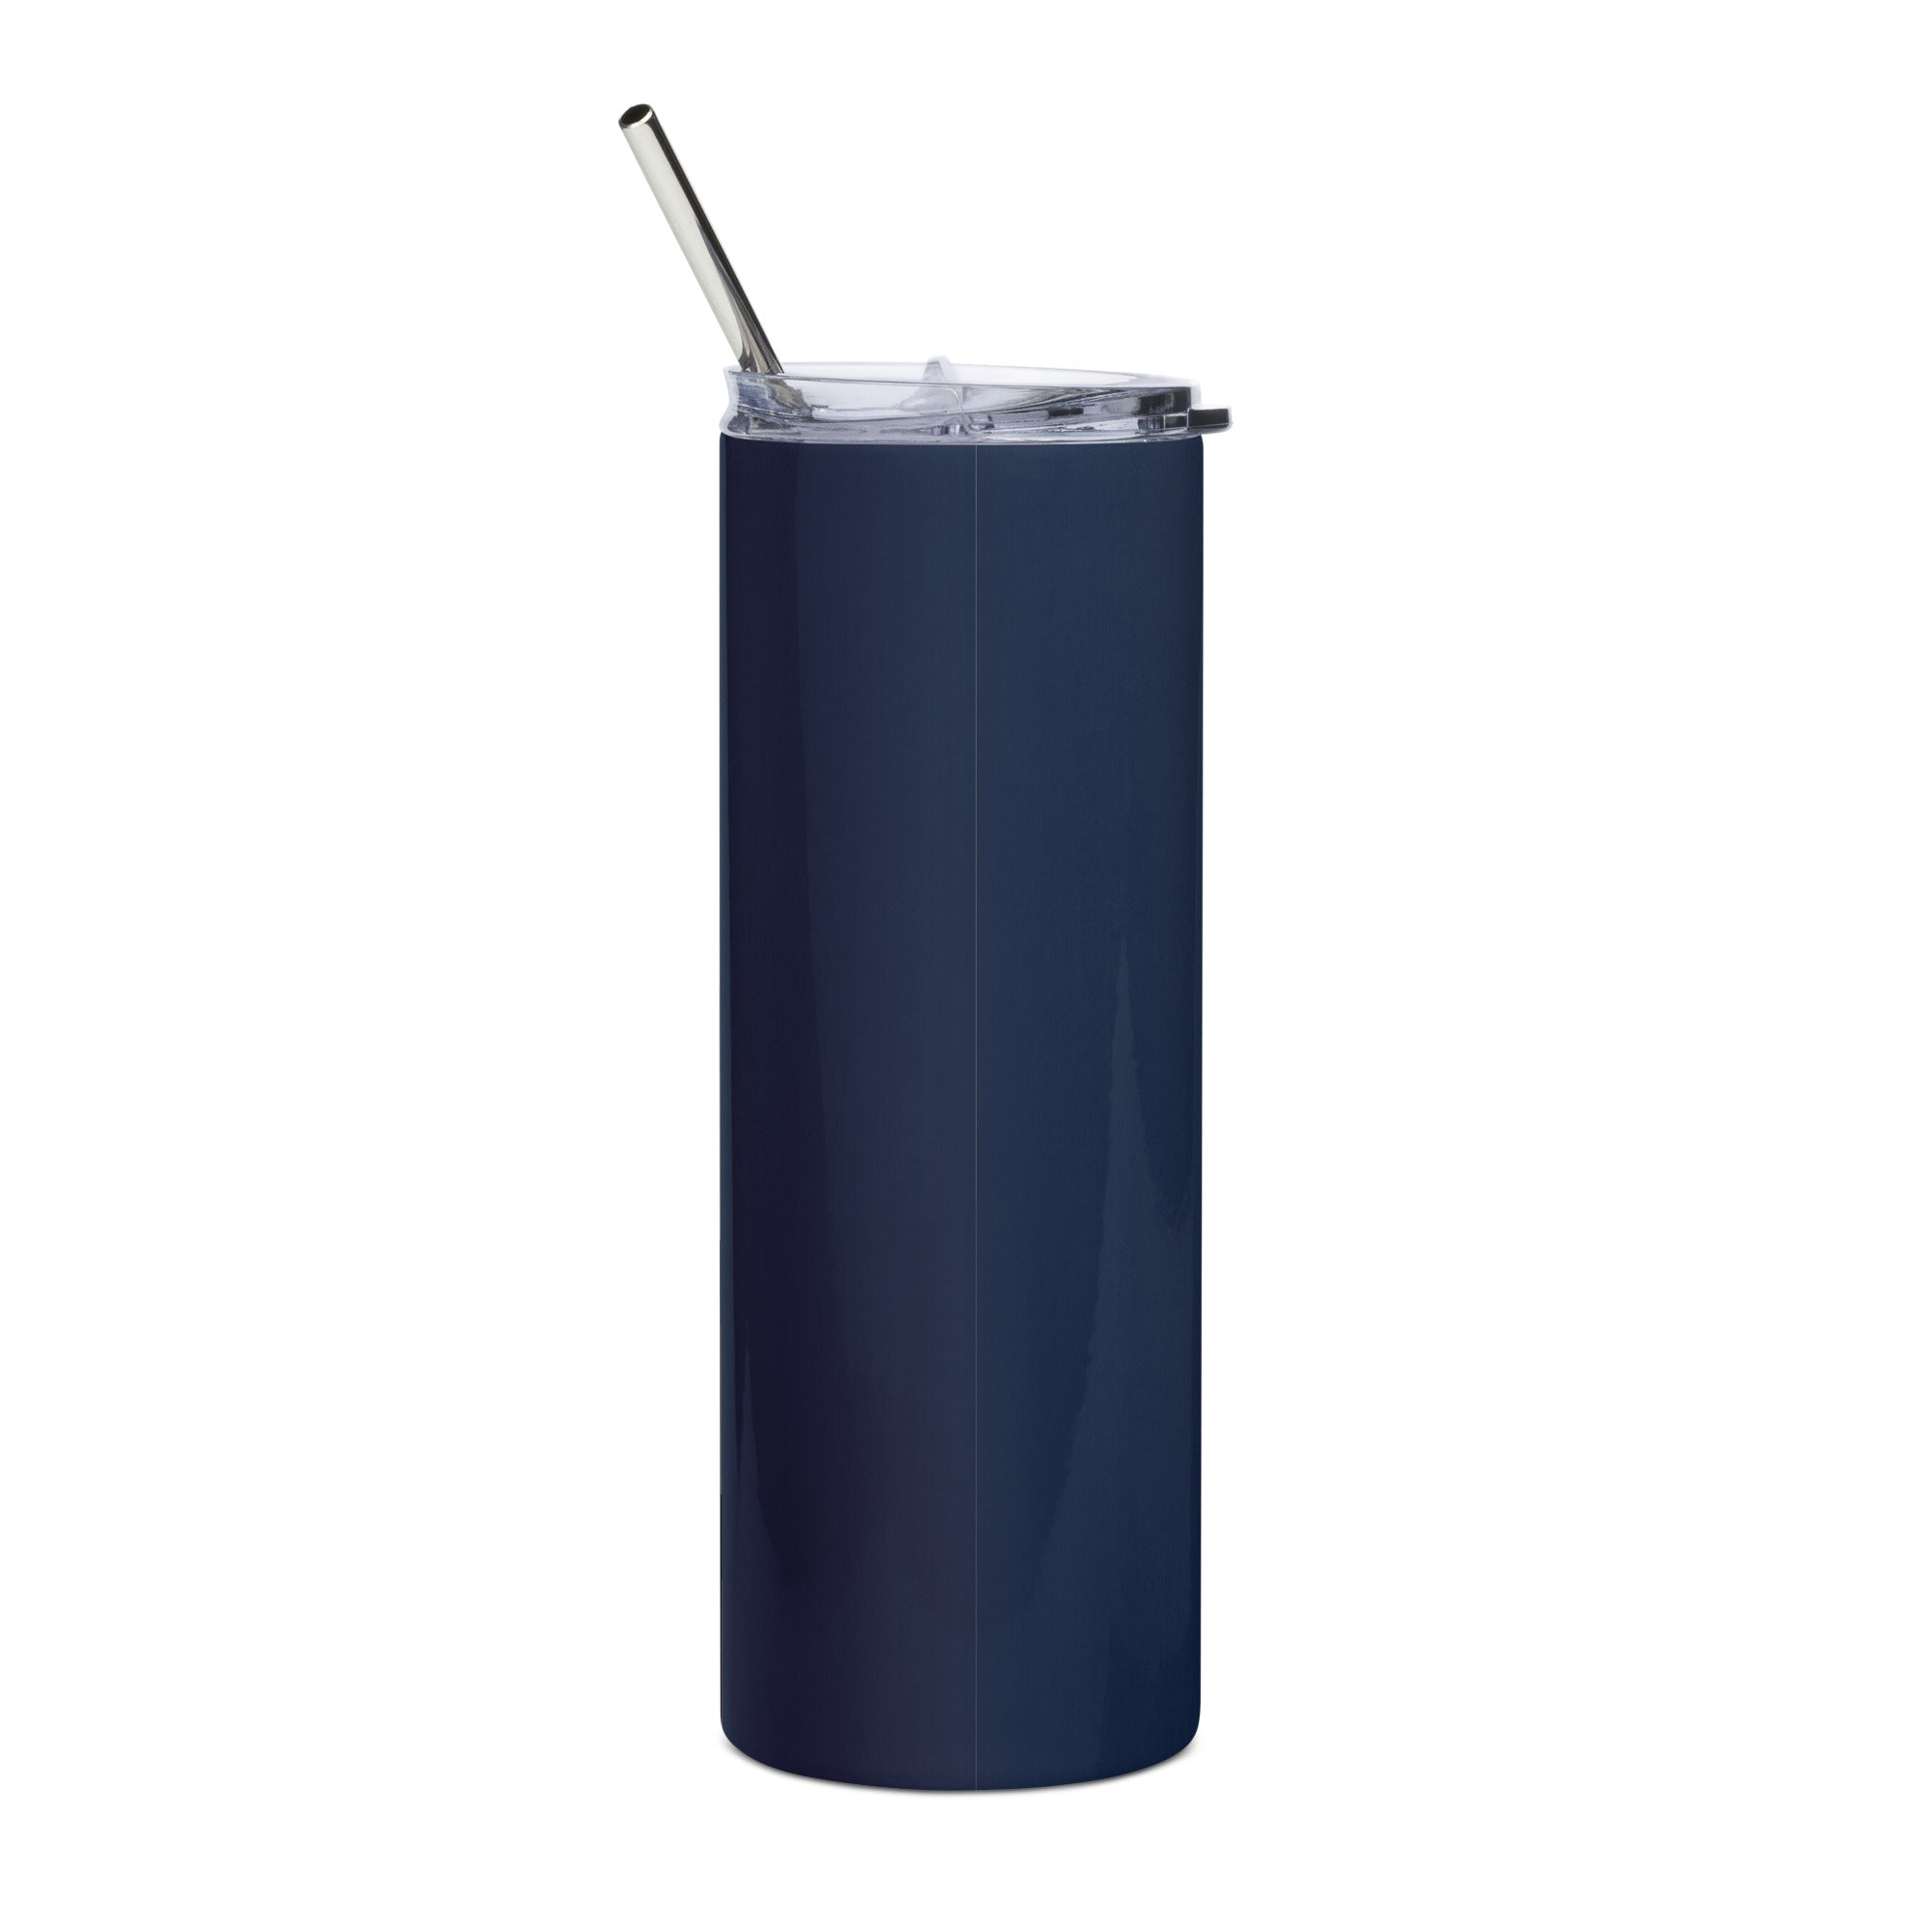 P TECH Stainless steel tumbler